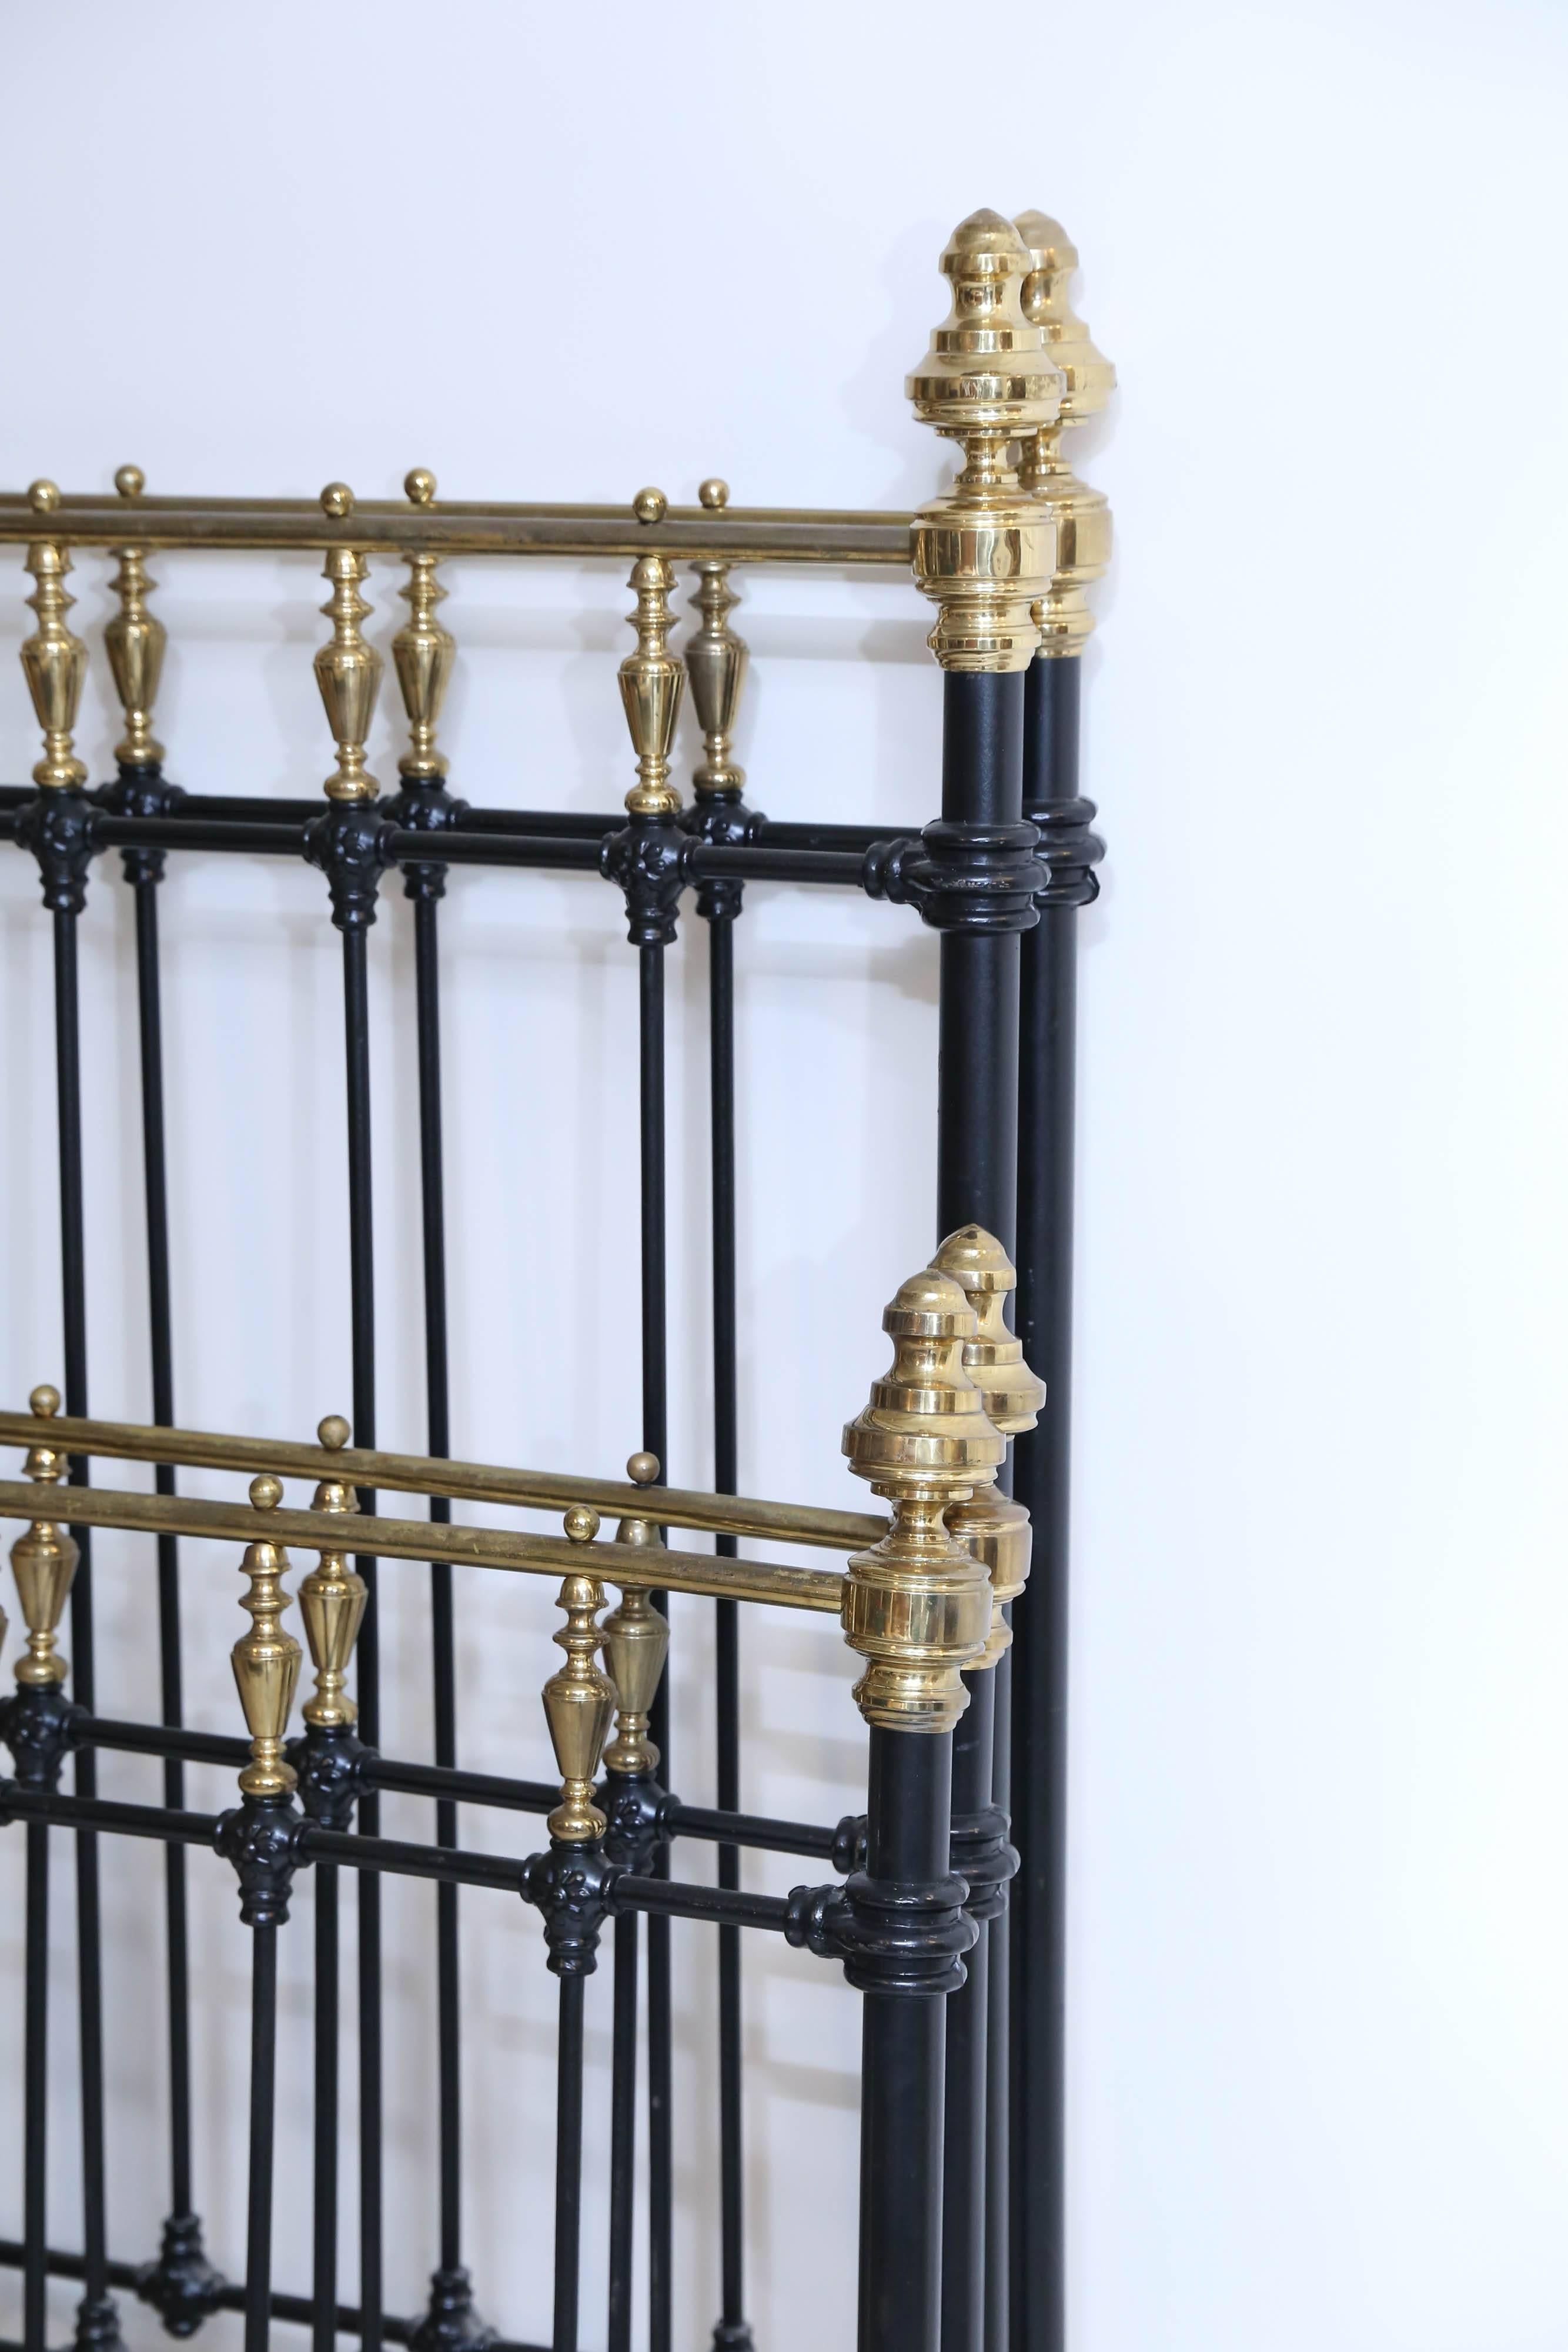 Very handsome pair of painted black cast iron beds with polished brass tall finials.
Beds from a French Nunnery are a bit smaller than standard twin.